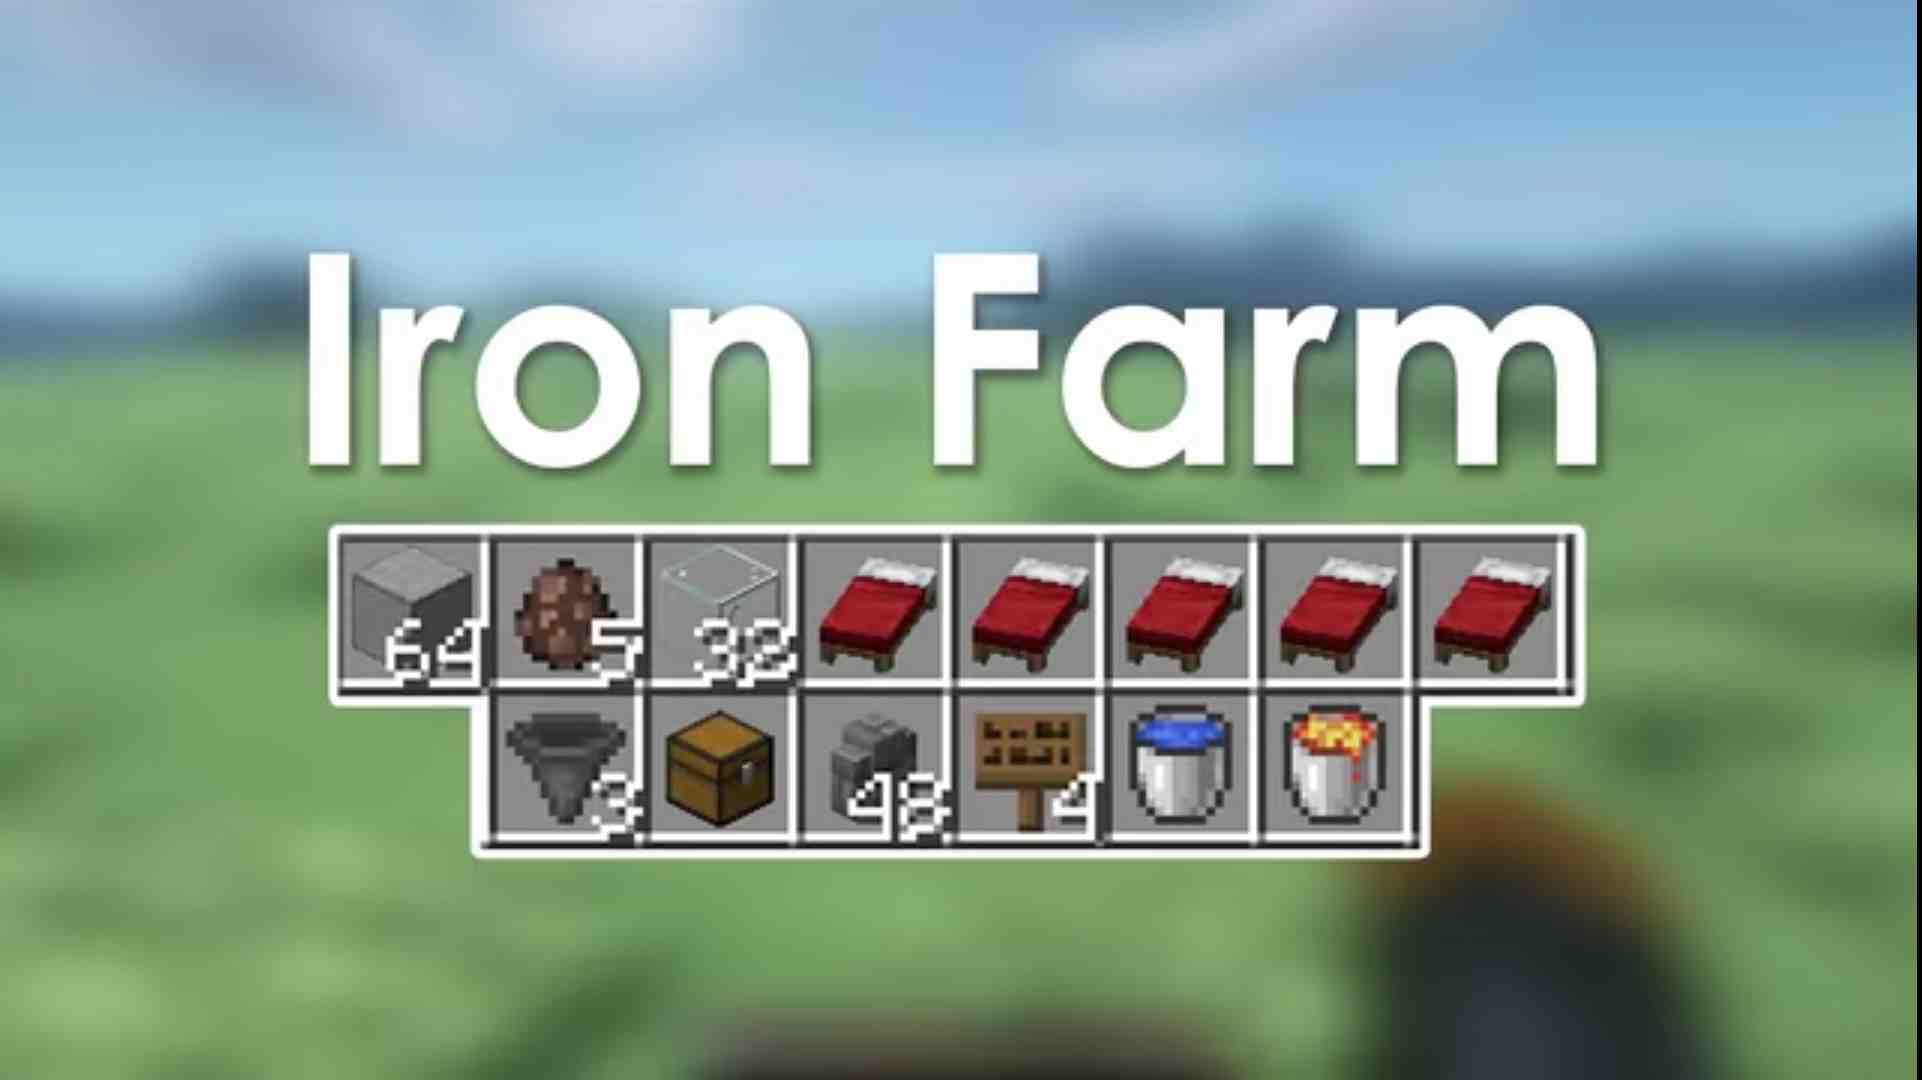 How To Make Iron Farm in Minecraft?